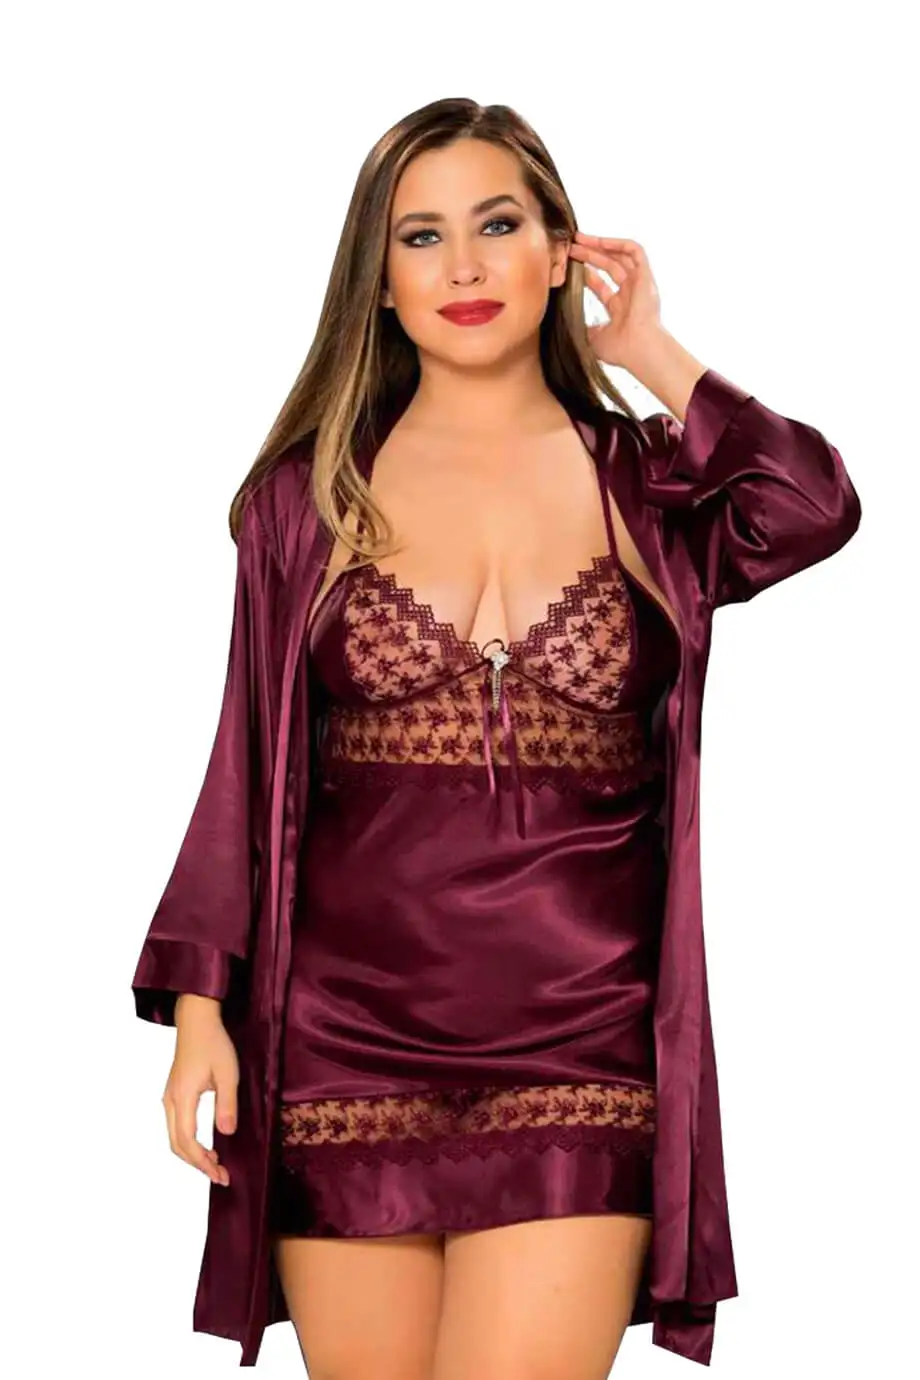 

Plus Size Nightwear 2021 New Seasons Luxury Satin Nightgowns Sold At Affordable Prices Maroon Color Best Product